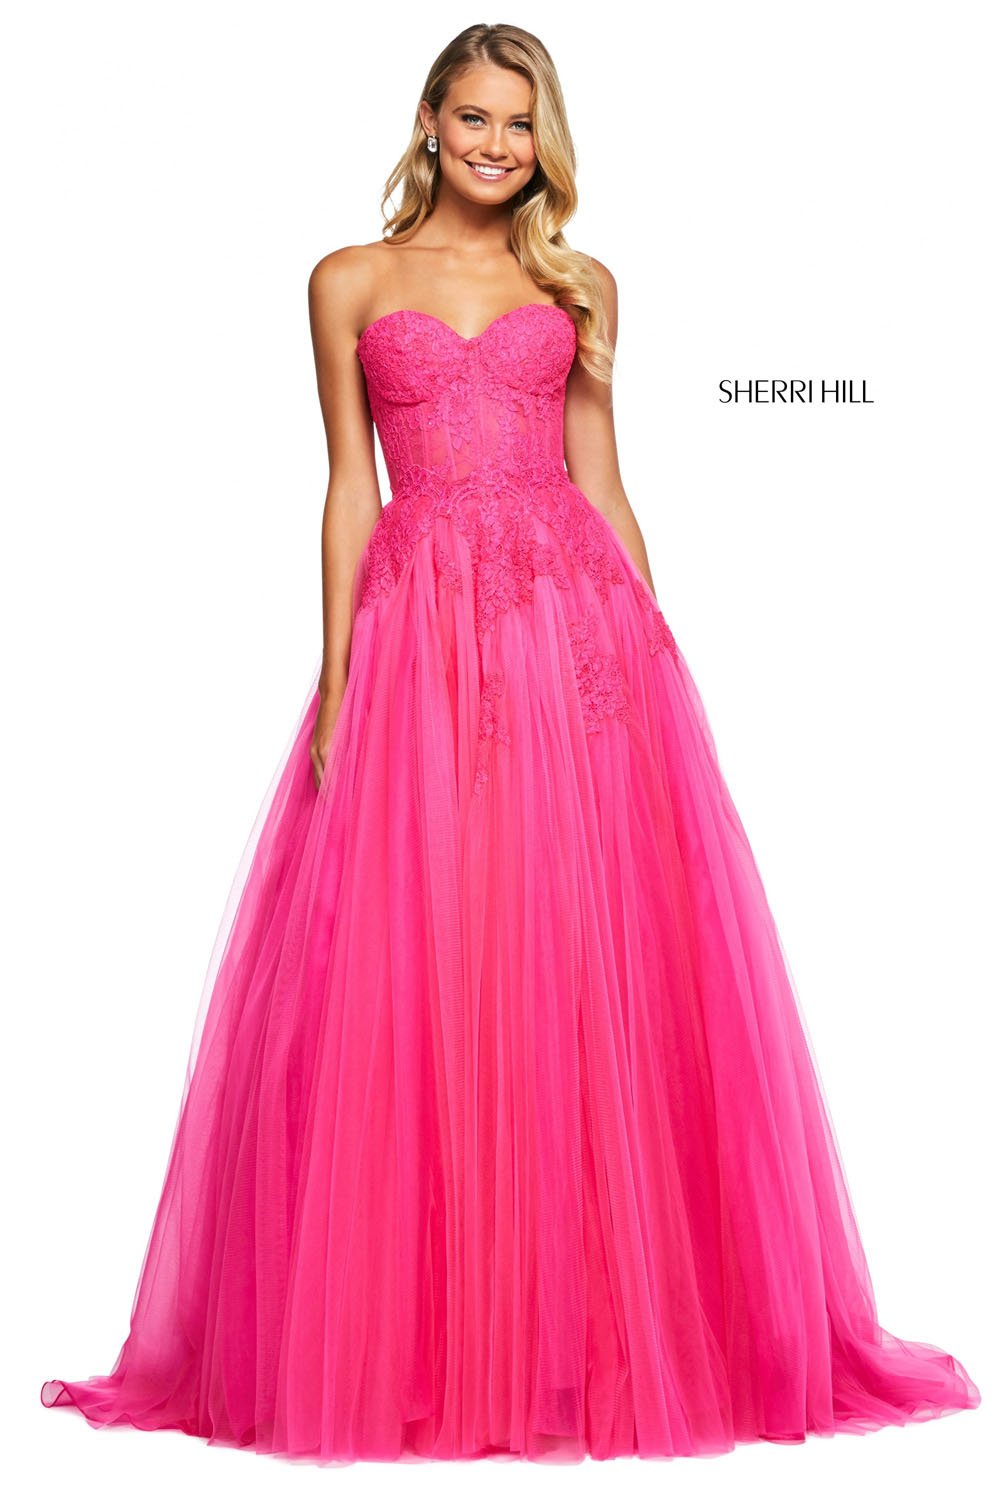 Sherri Hill 53503 dress images in these colors: Black, Navy, Fuchsia, Red, Black Ivory, Blush.